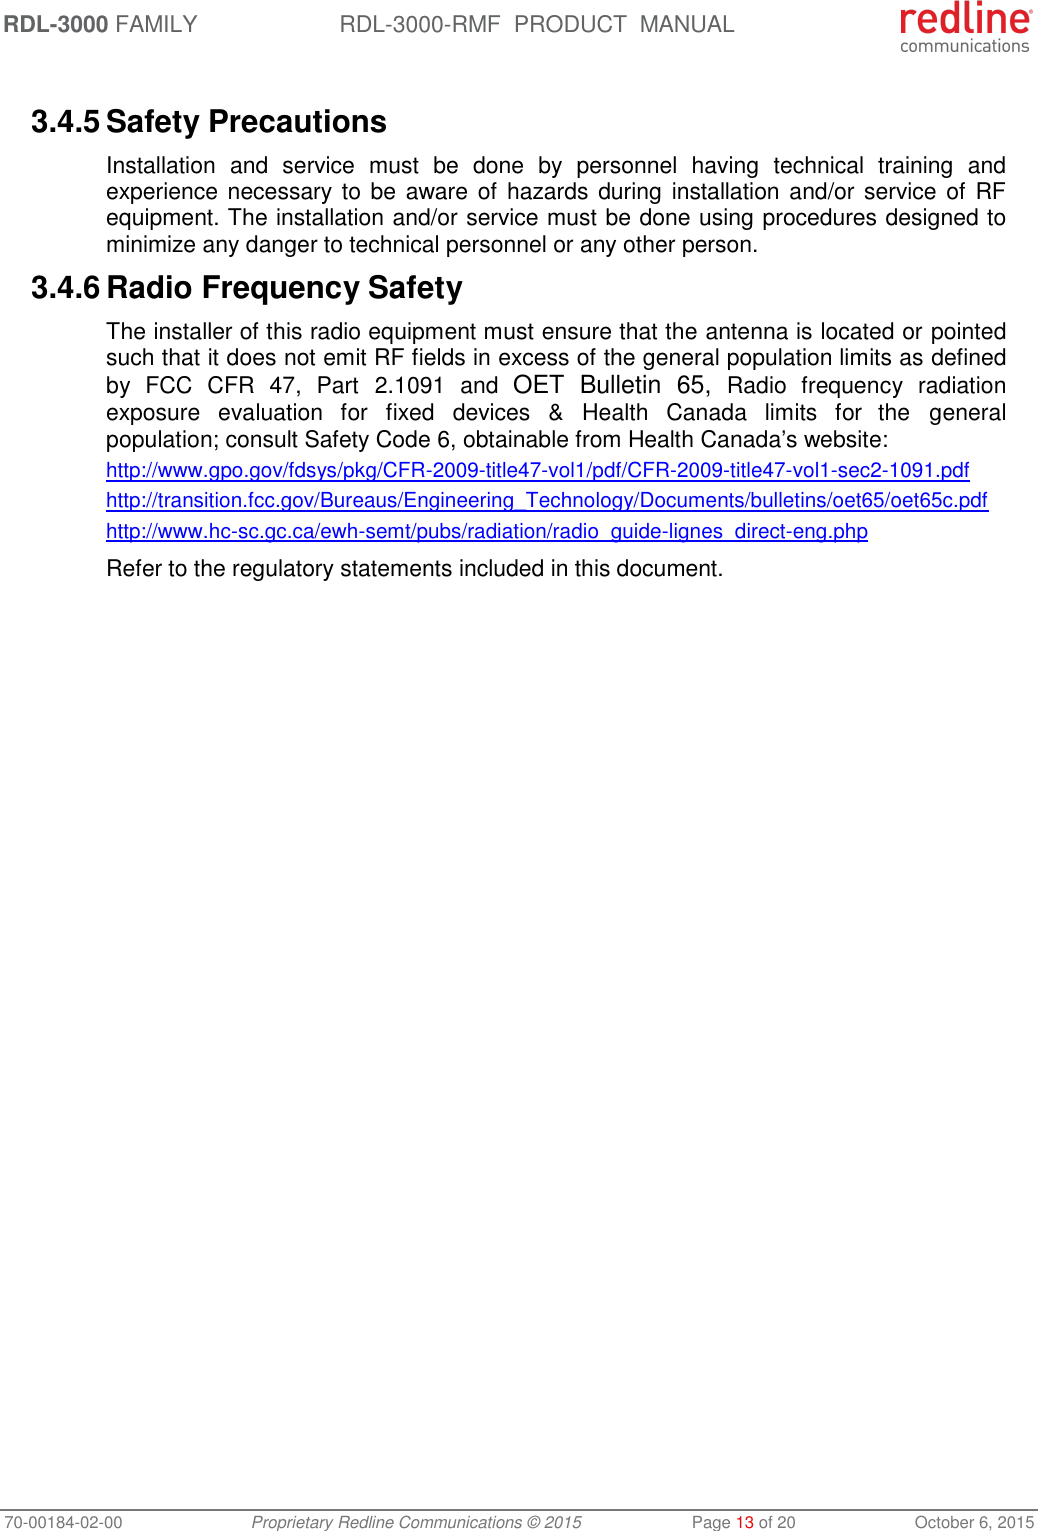 RDL-3000 FAMILY RDL-3000-RMF  PRODUCT  MANUAL 70-00184-02-00 Proprietary Redline Communications © 2015  Page 13 of 20  October 6, 2015  3.4.5 Safety Precautions  Installation  and  service  must  be  done  by  personnel  having  technical  training  and experience necessary to be aware of  hazards during  installation and/or service of RF equipment. The installation and/or service must be done using procedures designed to minimize any danger to technical personnel or any other person.  3.4.6 Radio Frequency Safety The installer of this radio equipment must ensure that the antenna is located or pointed such that it does not emit RF fields in excess of the general population limits as defined by  FCC  CFR  47,  Part  2.1091  and  OET  Bulletin  65,  Radio  frequency  radiation exposure  evaluation  for  fixed devices  &amp;  Health Canada  limits  for  the  general population; consult Safety Code 6, obtainable from Health Canada’s website: http://www.gpo.gov/fdsys/pkg/CFR-2009-title47-vol1/pdf/CFR-2009-title47-vol1-sec2-1091.pdf http://transition.fcc.gov/Bureaus/Engineering_Technology/Documents/bulletins/oet65/oet65c.pdf http://www.hc-sc.gc.ca/ewh-semt/pubs/radiation/radio_guide-lignes_direct-eng.php Refer to the regulatory statements included in this document. 